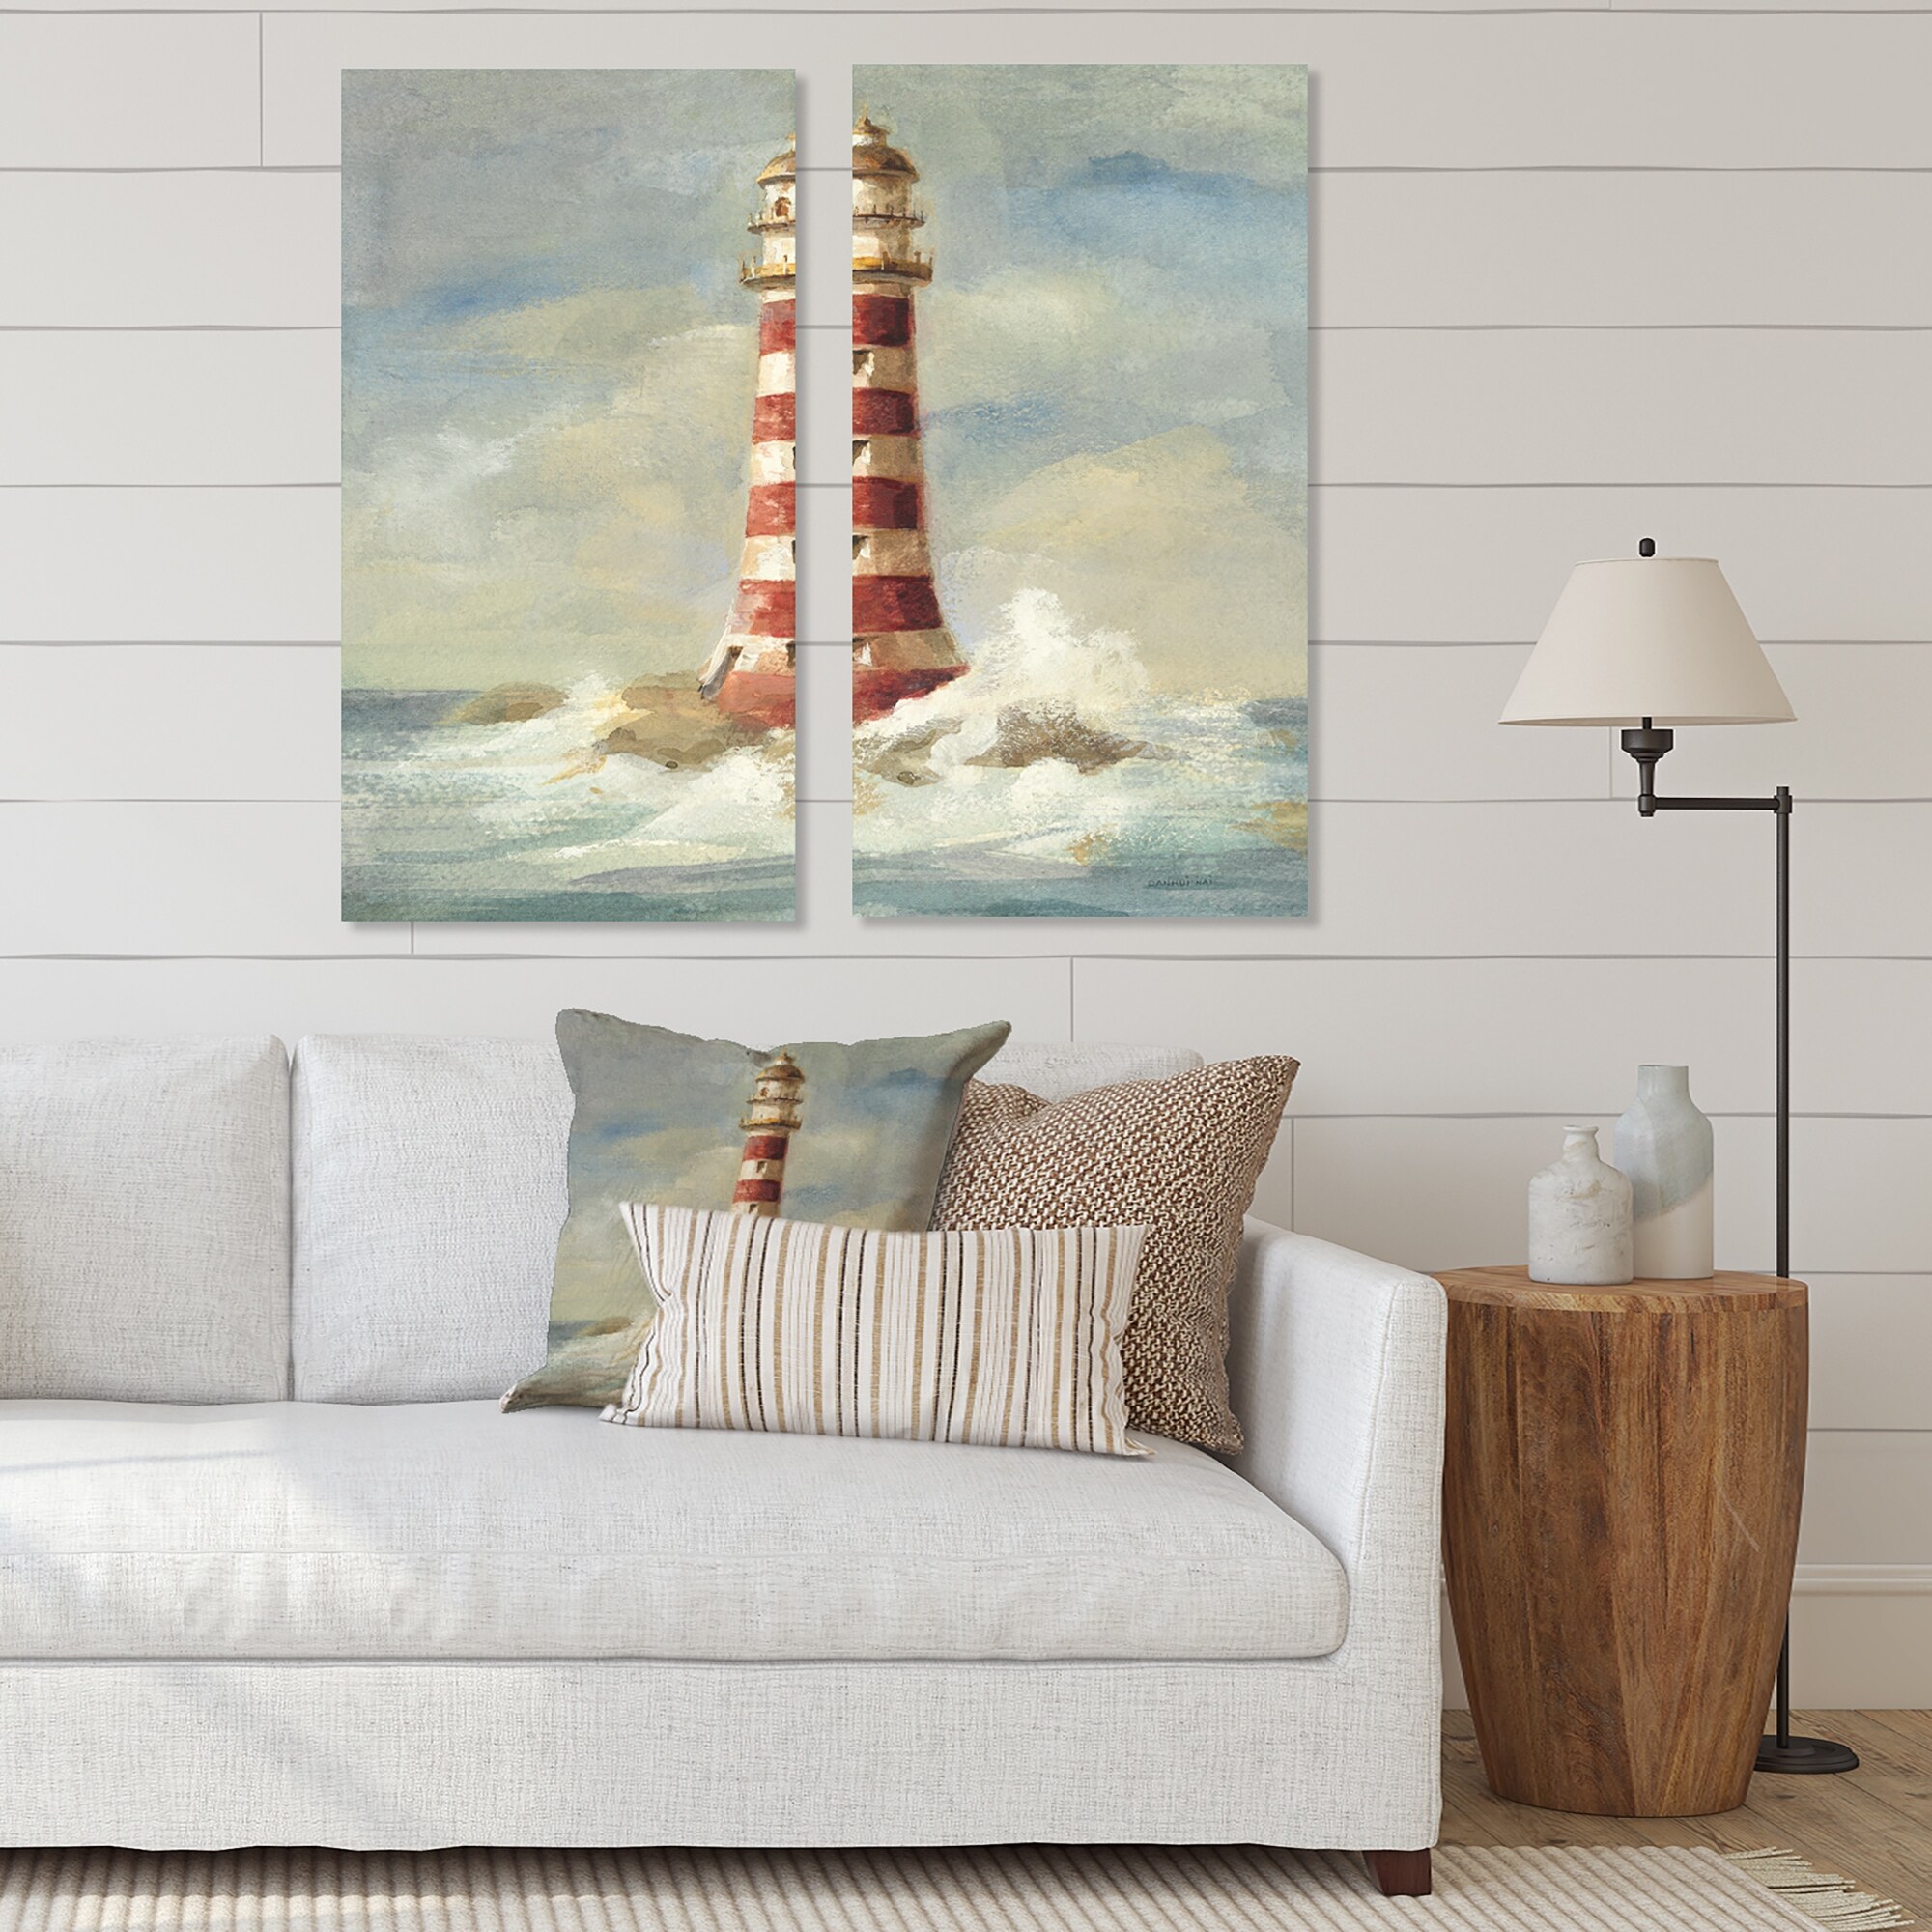 Lighthouse Ocean Coast Wooden House Tapestry Wall Hanging for Living Room Dorm 